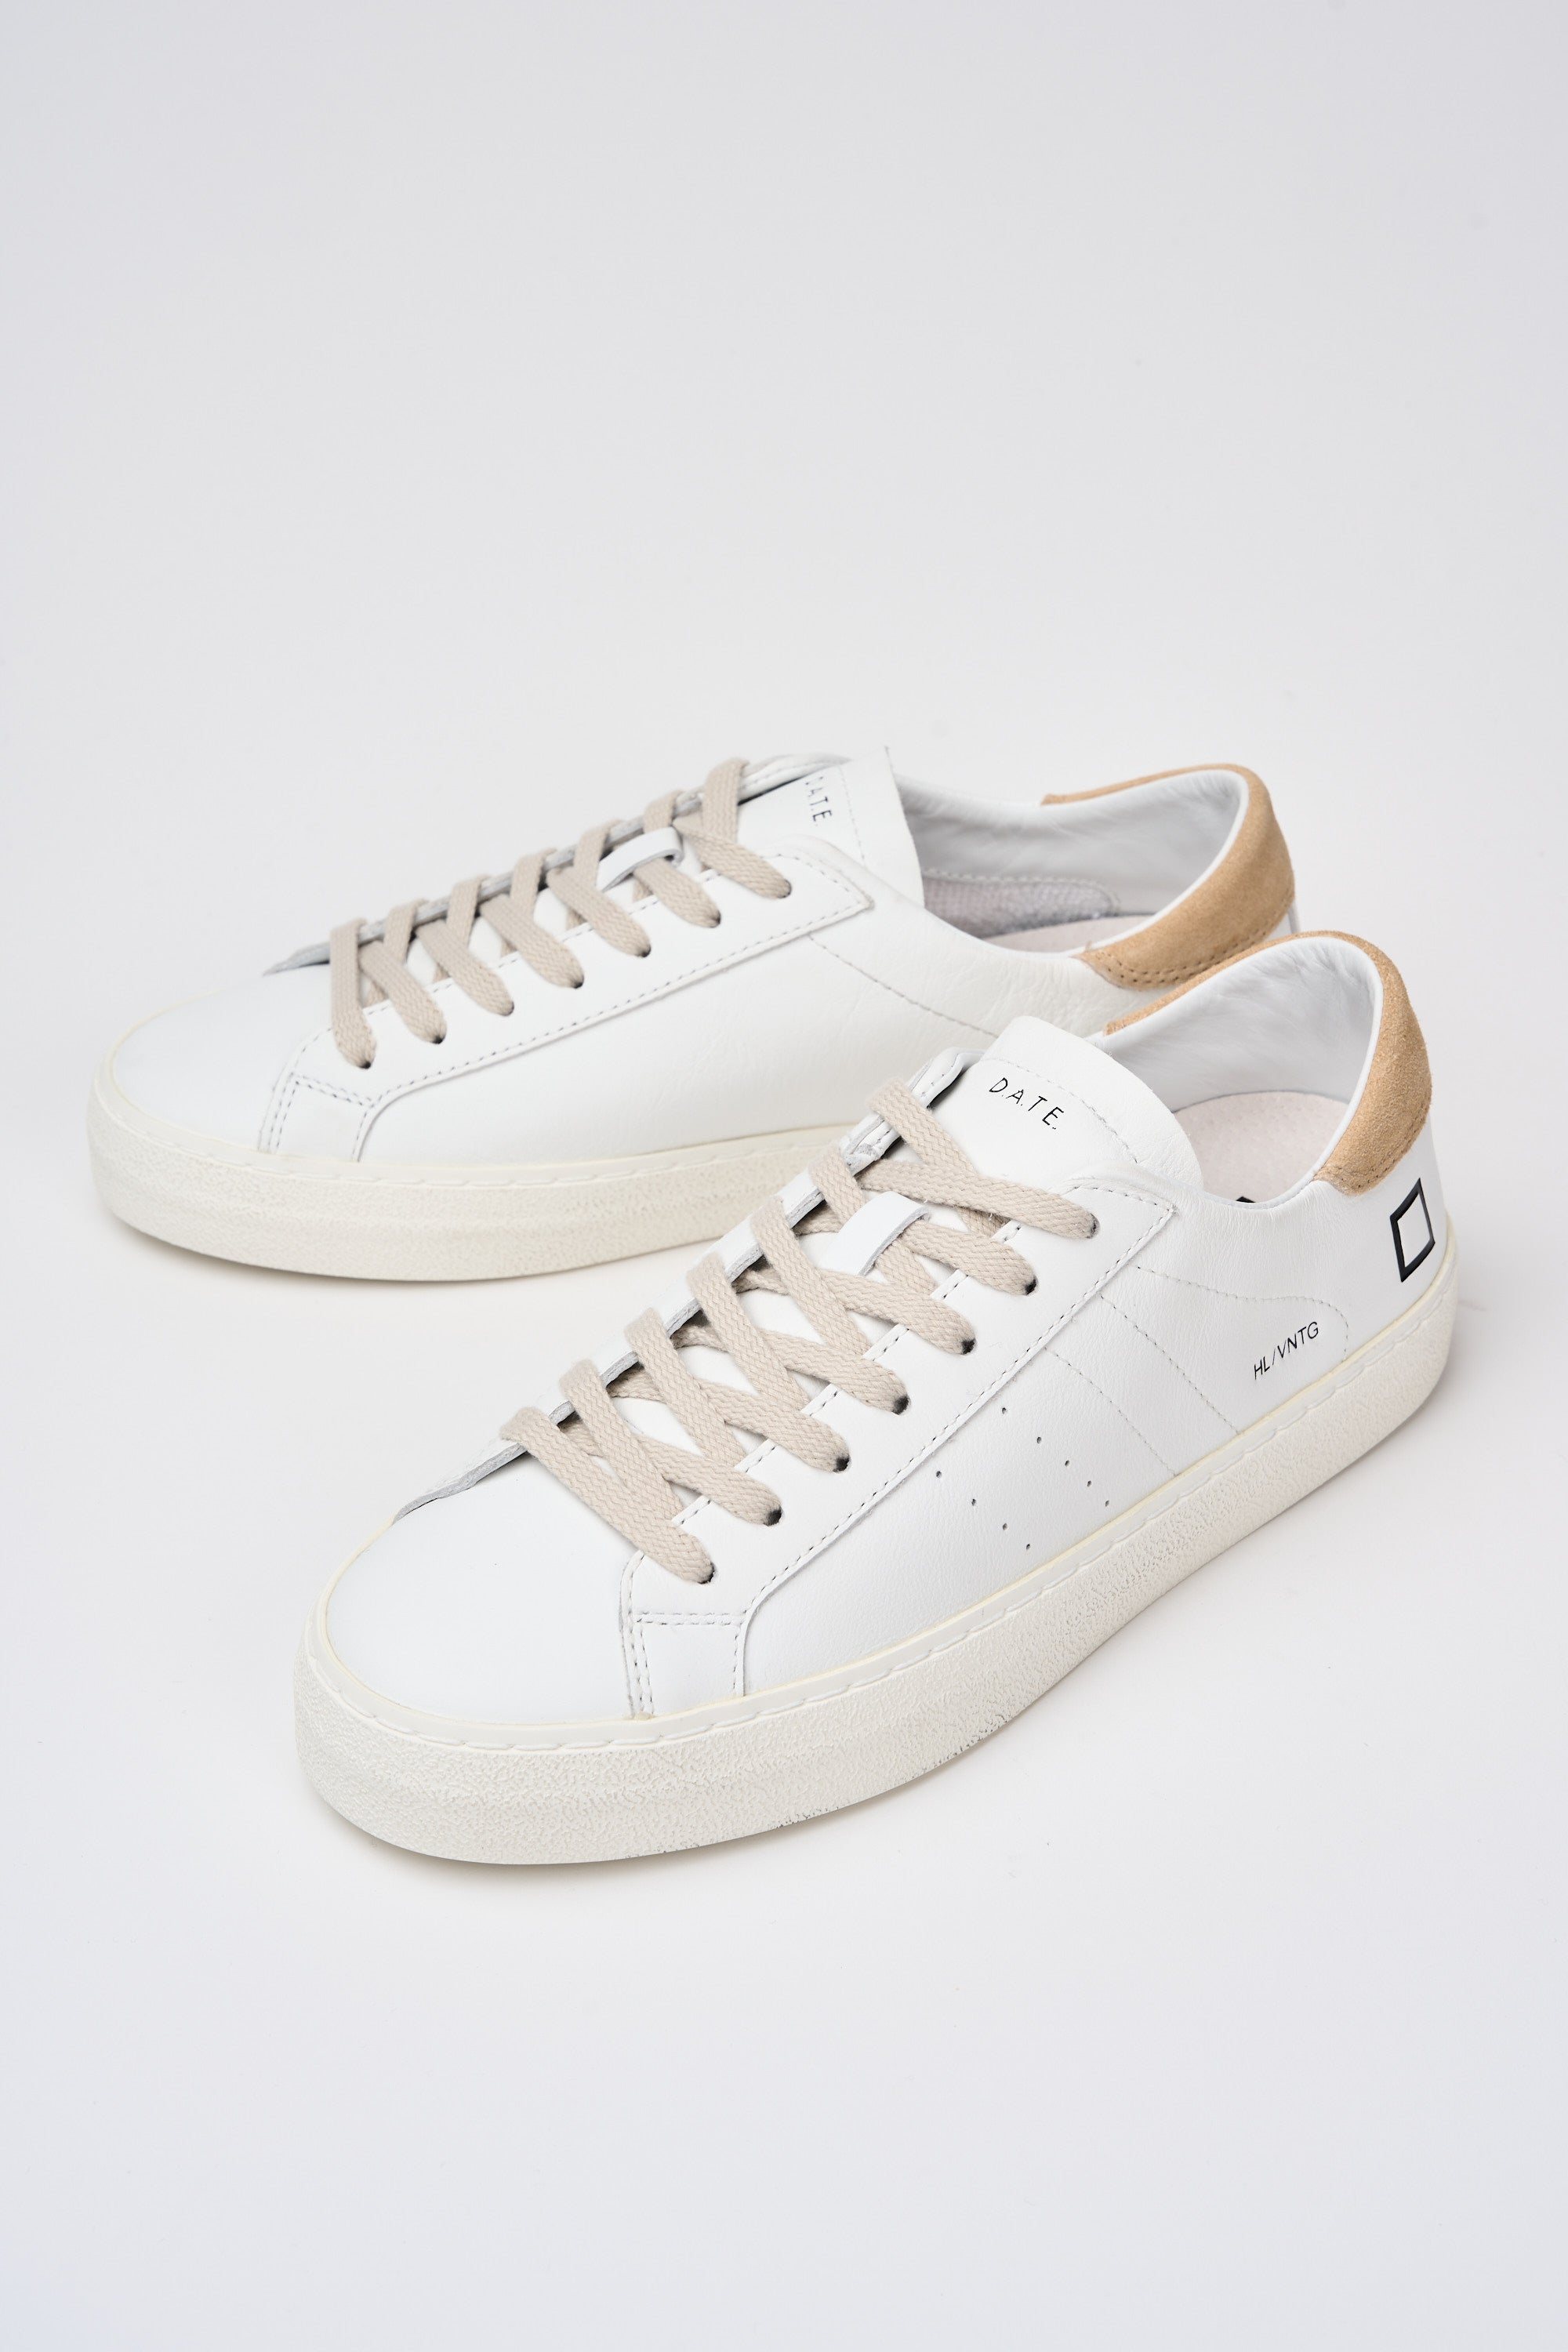 D.A.T.E. Hill Low Vintage Leather Sneakers White/Beige-7